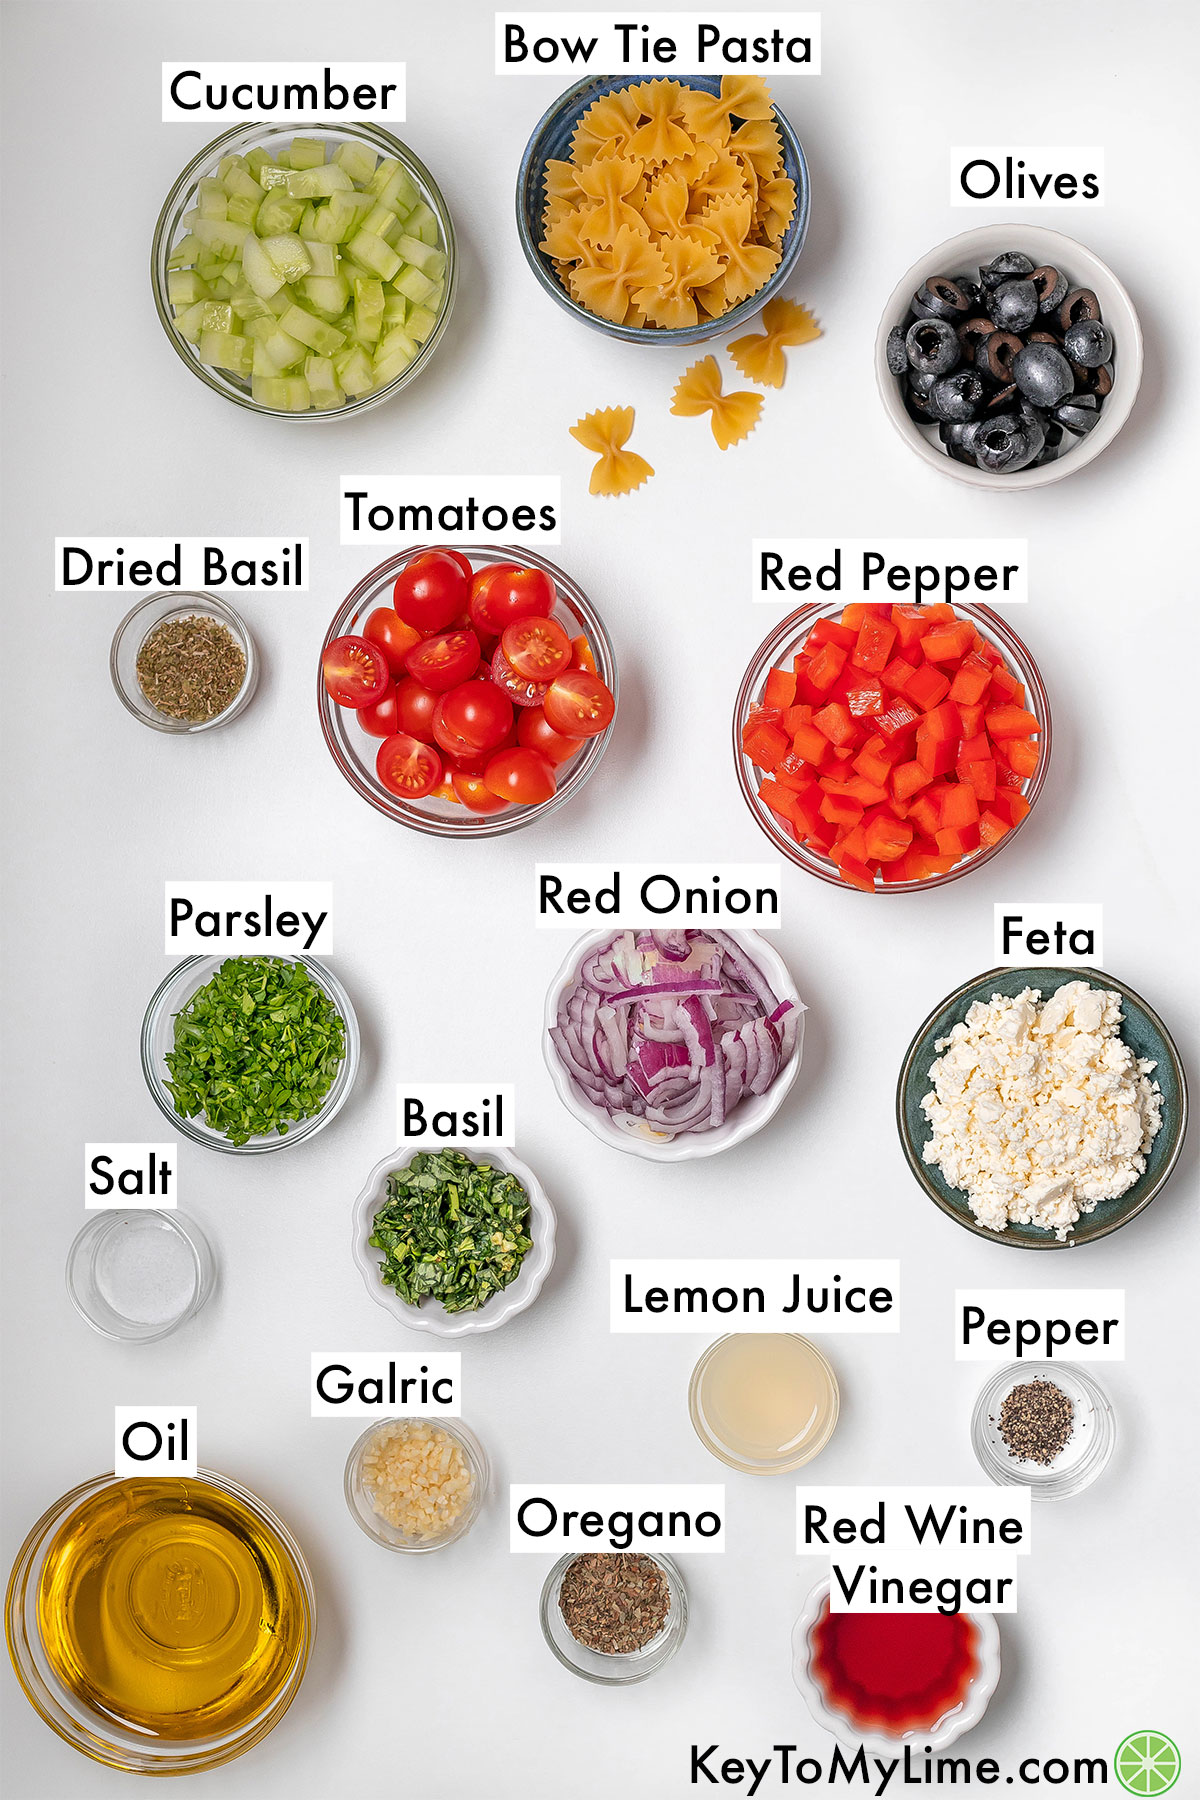 The labeled ingredients for bow tie pasta salad.